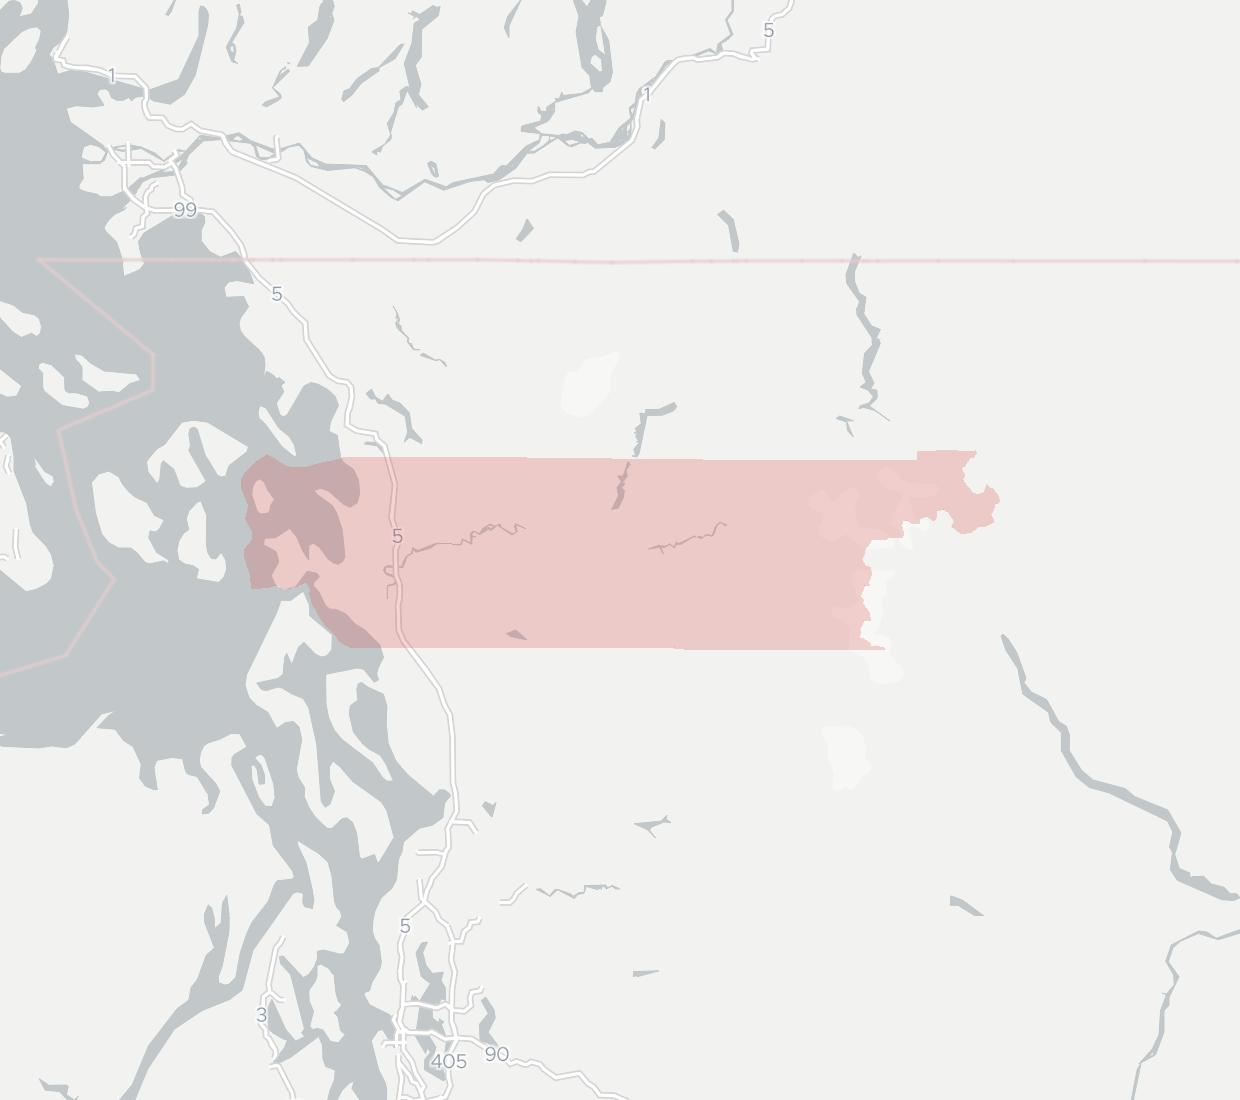 Access - Anacortes Fiber Internet Availability Map. Click for interactive map.